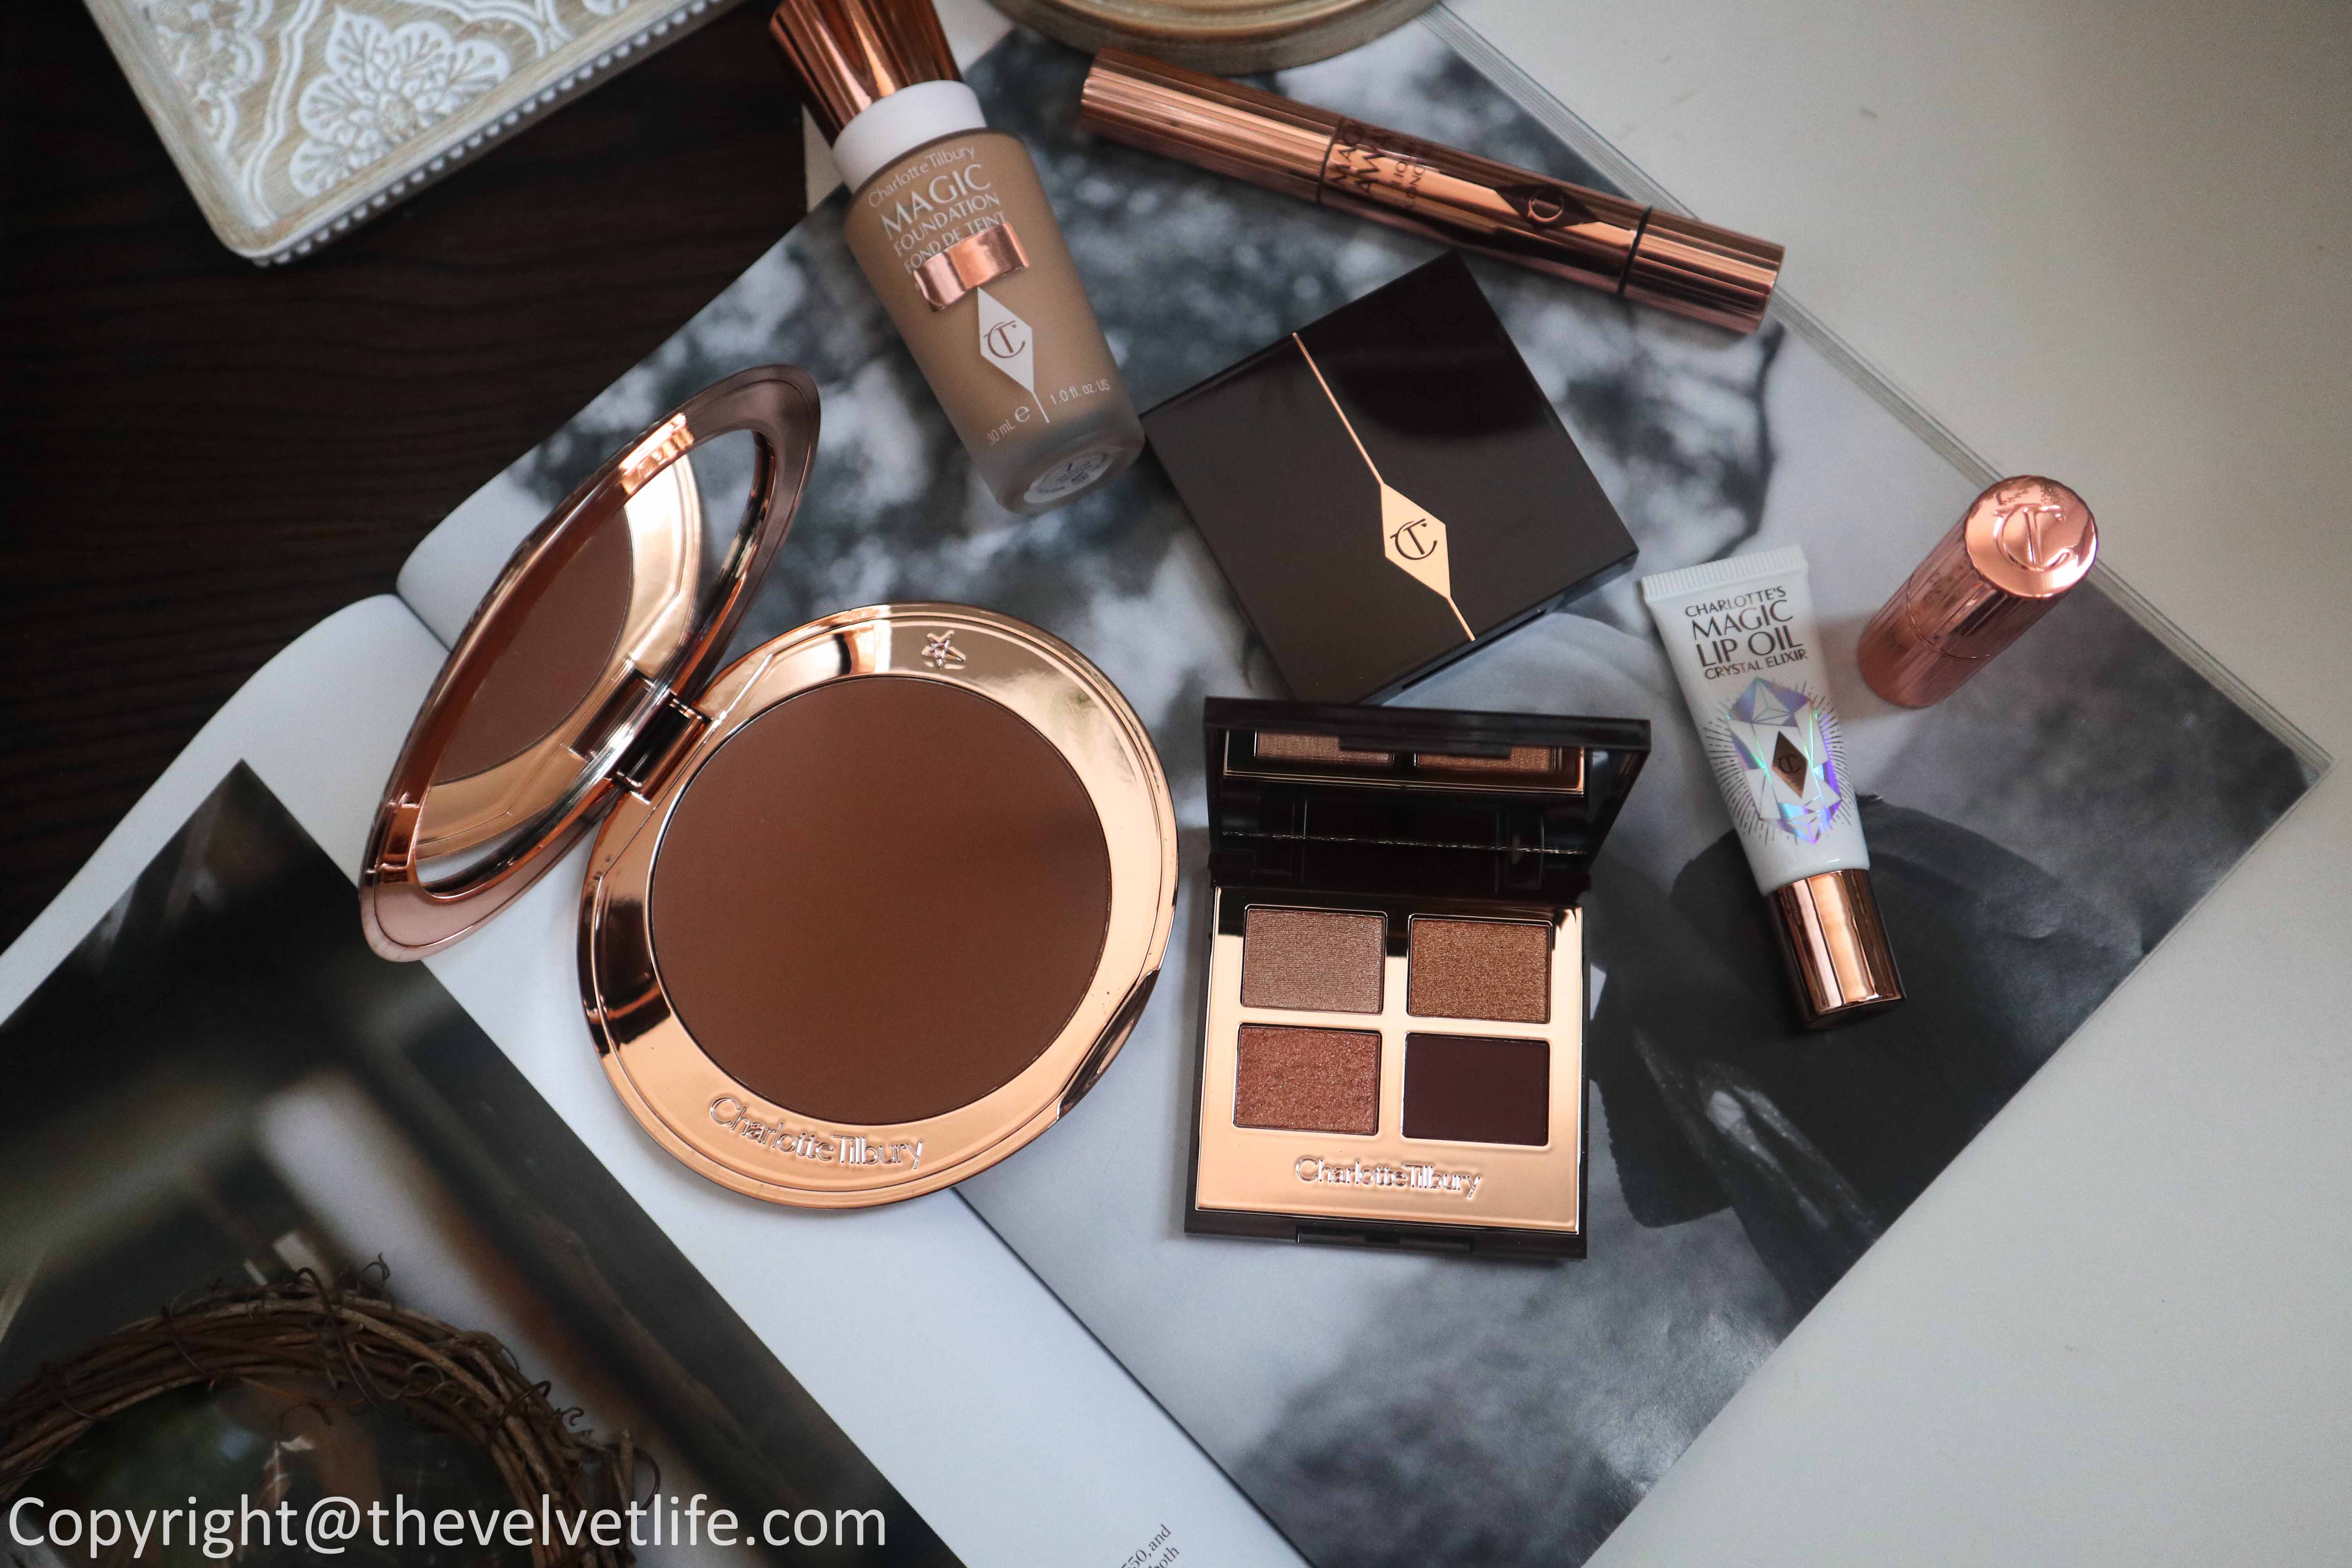 Review of new Charlotte Tilbury Airbrush Bronzer, Magic Lip Oil Crystal Elixir, Queen of Glow, Sexy Sienna, Magic foundation, Magic Away Concealer